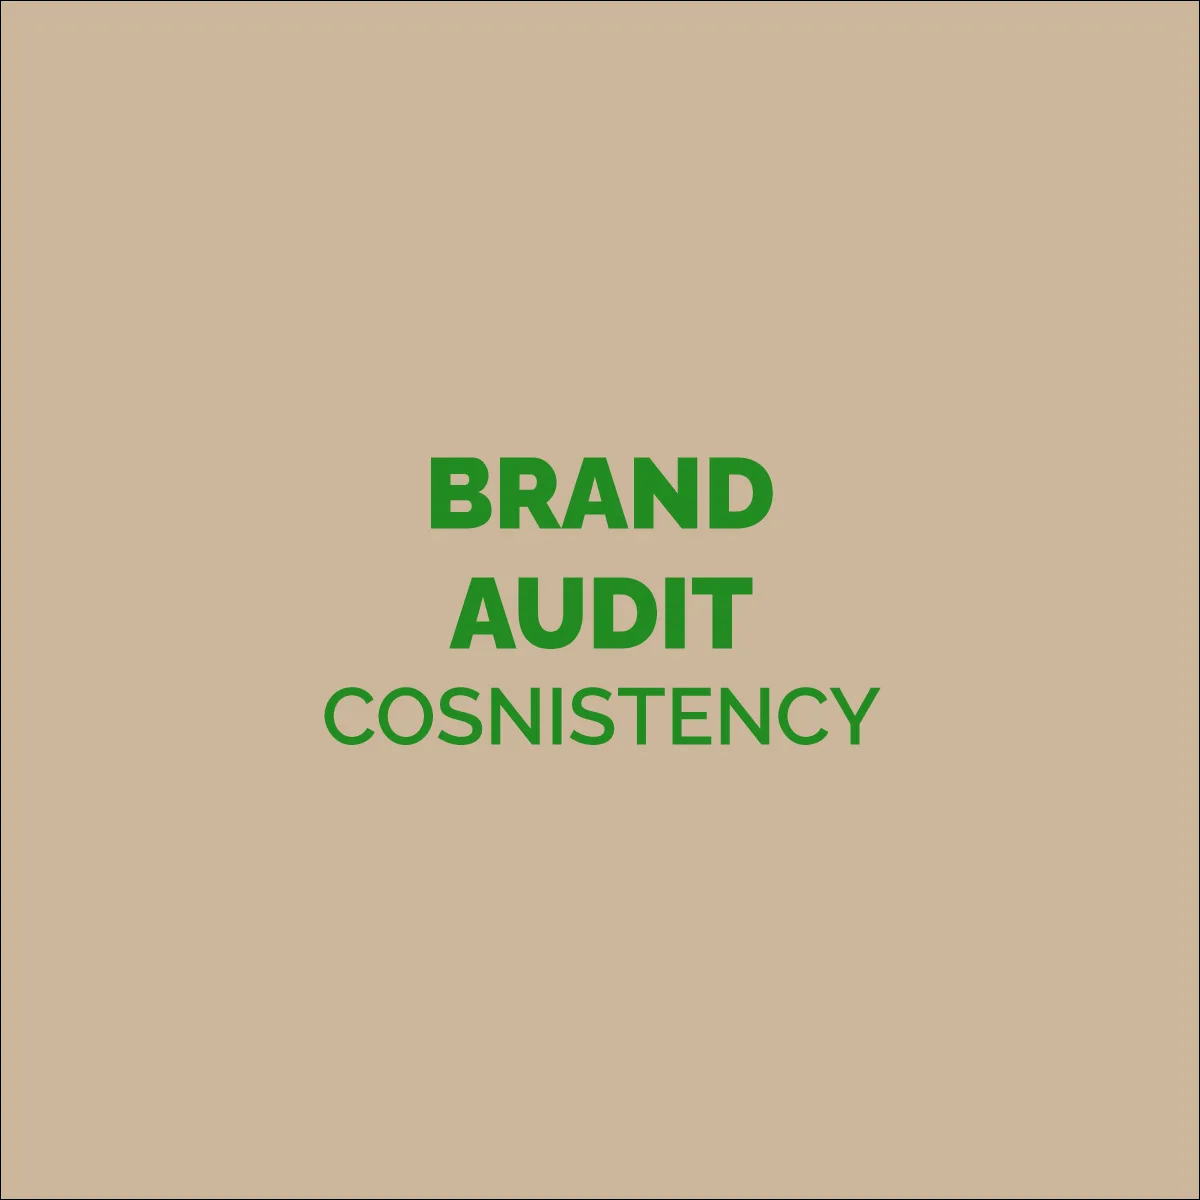 improving brand consistency with brand audit